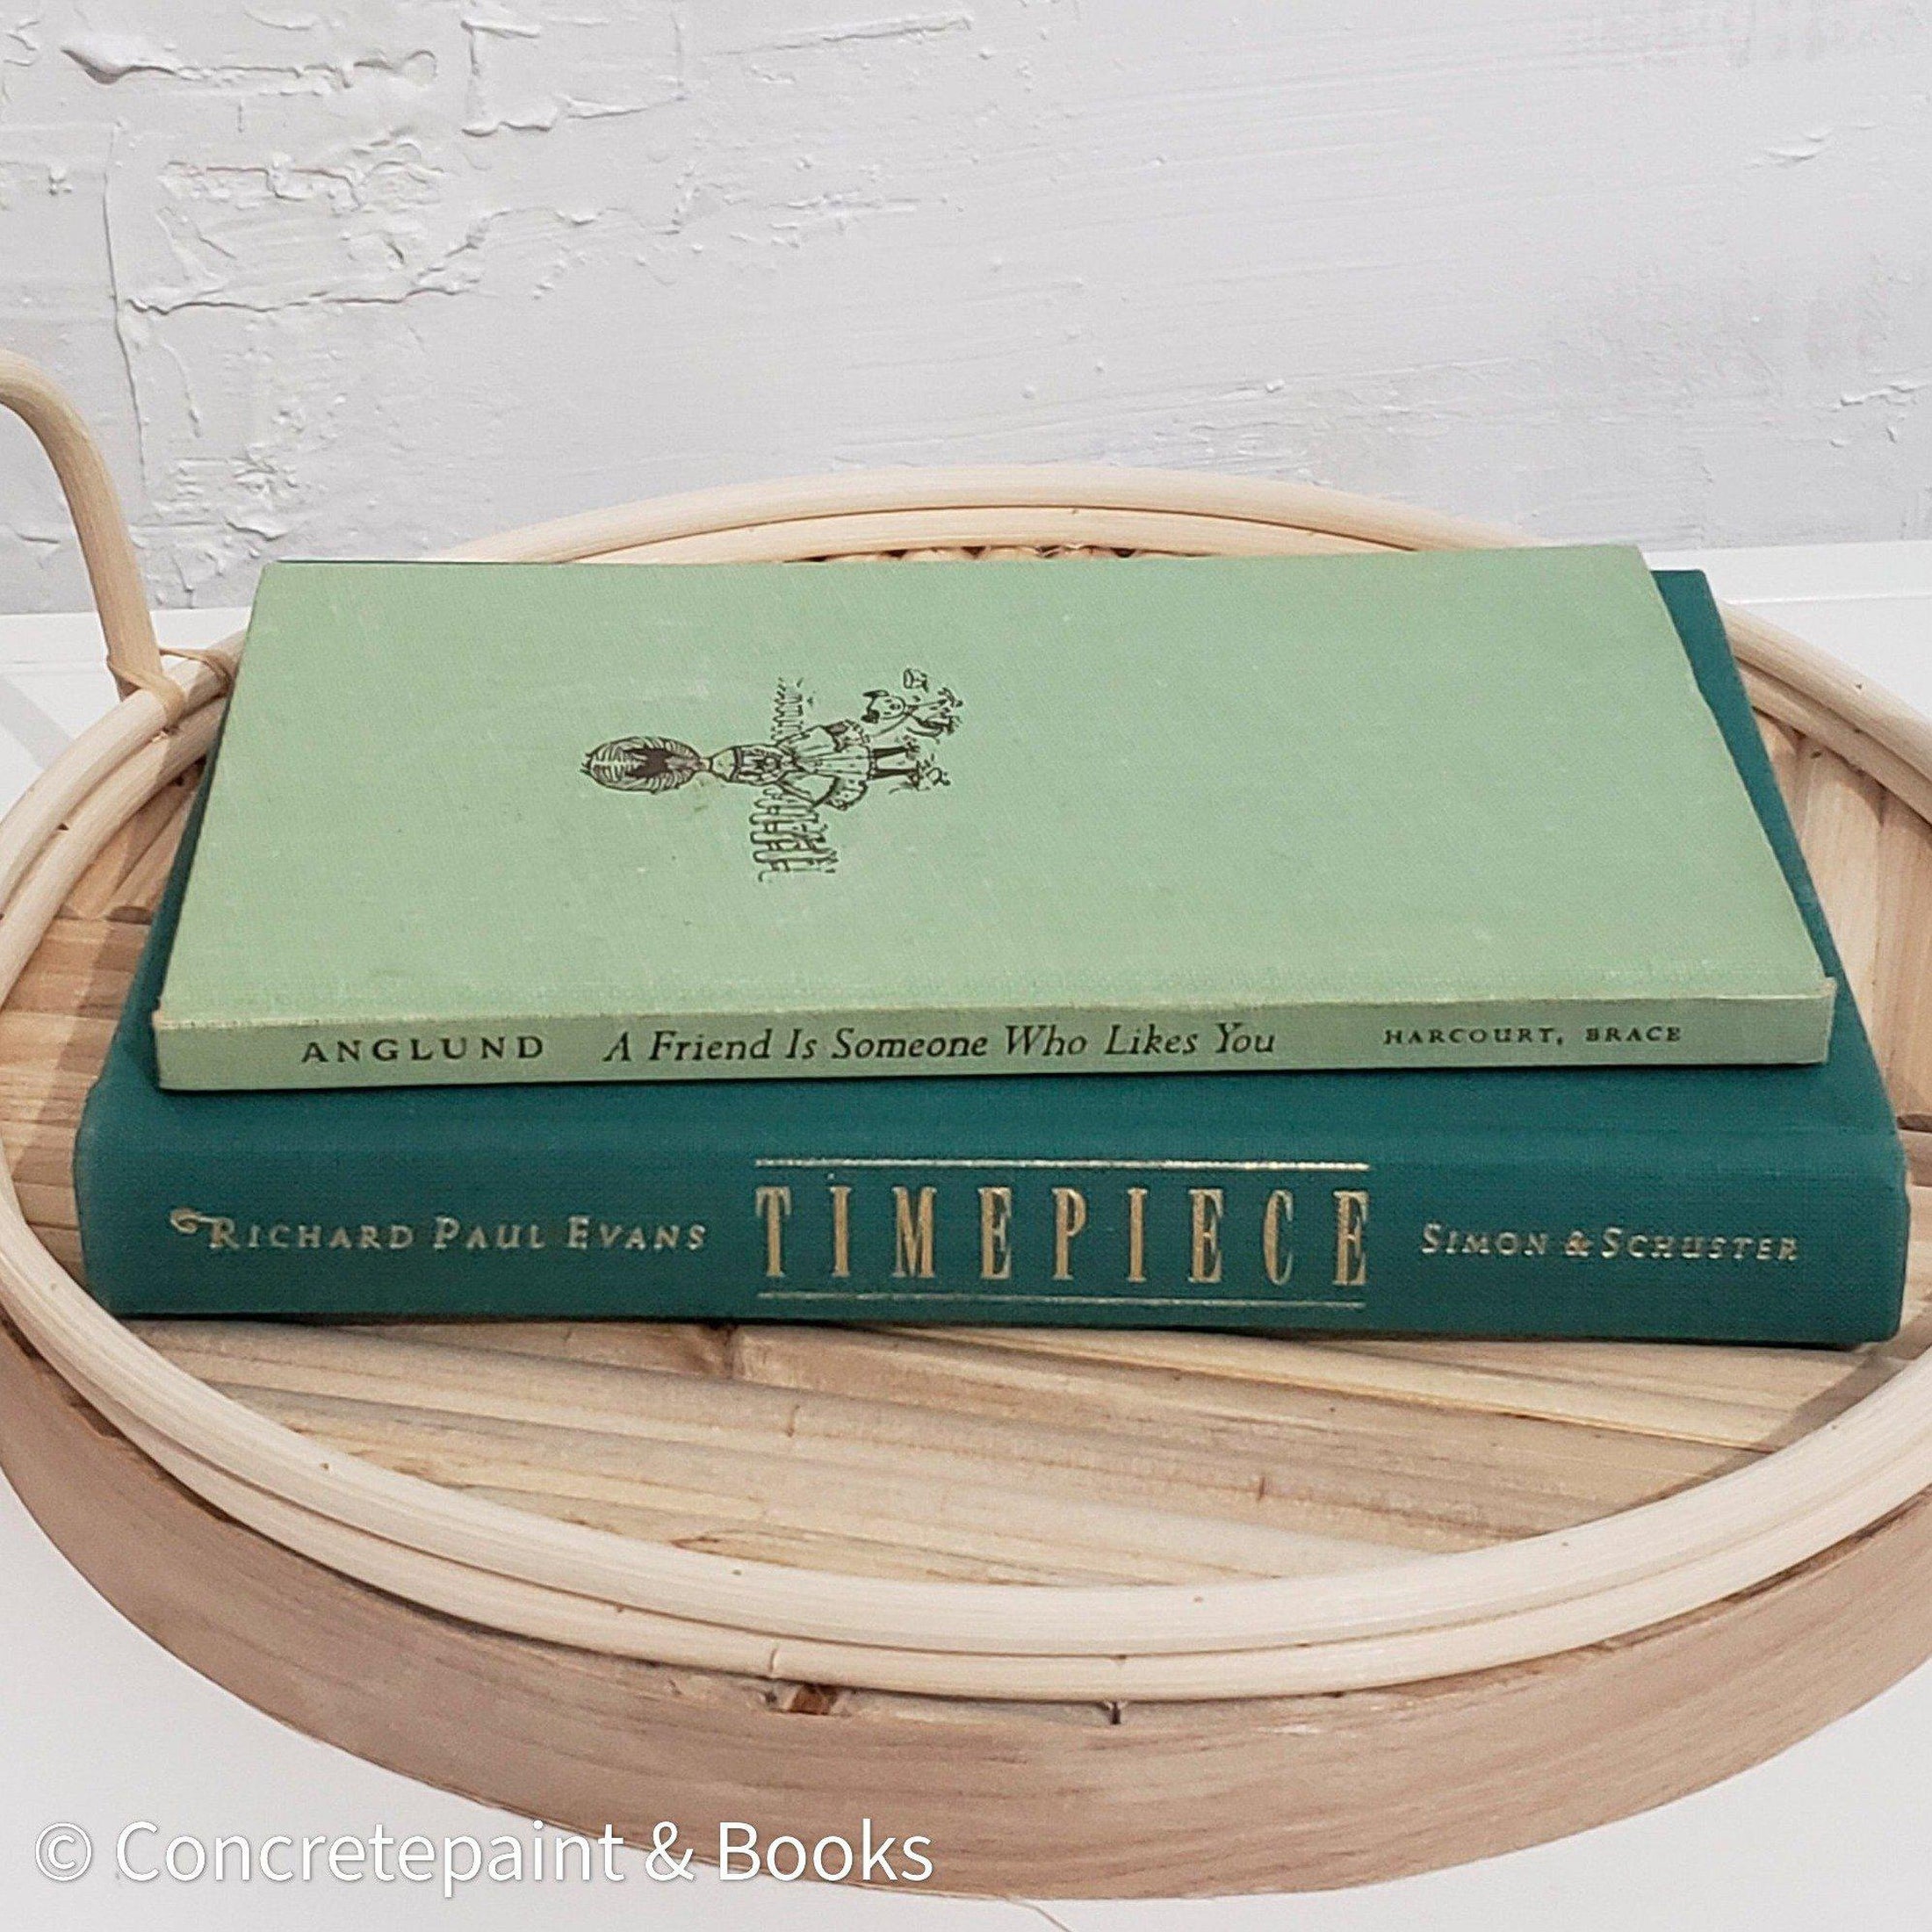 Large Set Decorative Books & Tray 8-Set of Decorative Books and Accents-[stack of real books for decorating]-[set of books with decorative accents]